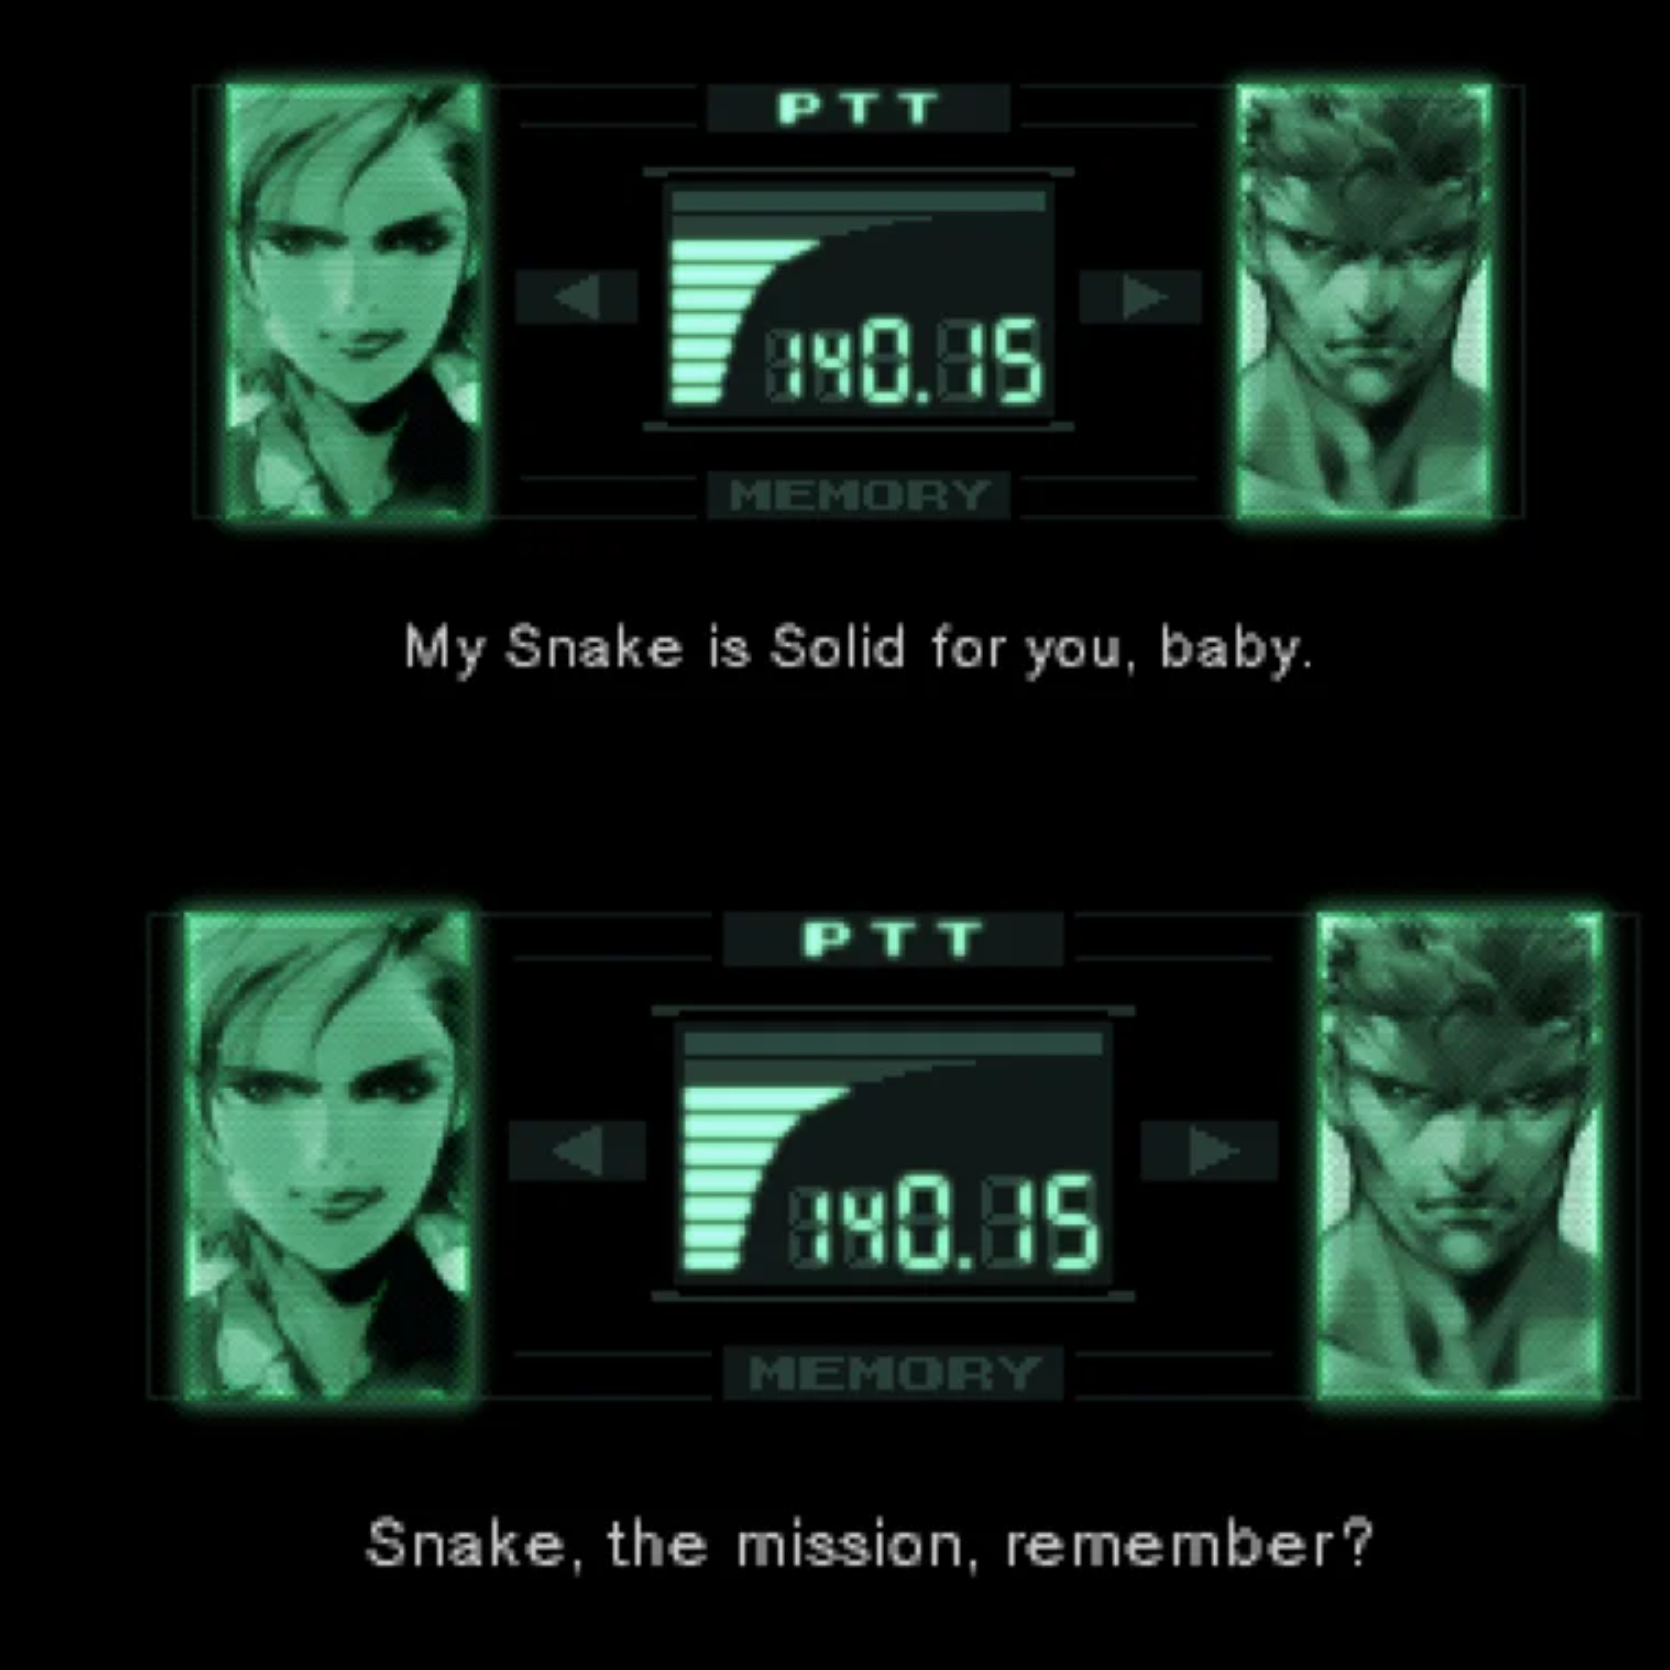 funny gaming memes - computer wallpaper - Ptt 140.Is Memory My Snake is Solid for you, baby. Ptt 140.215 Memory Snake, the mission, remember?